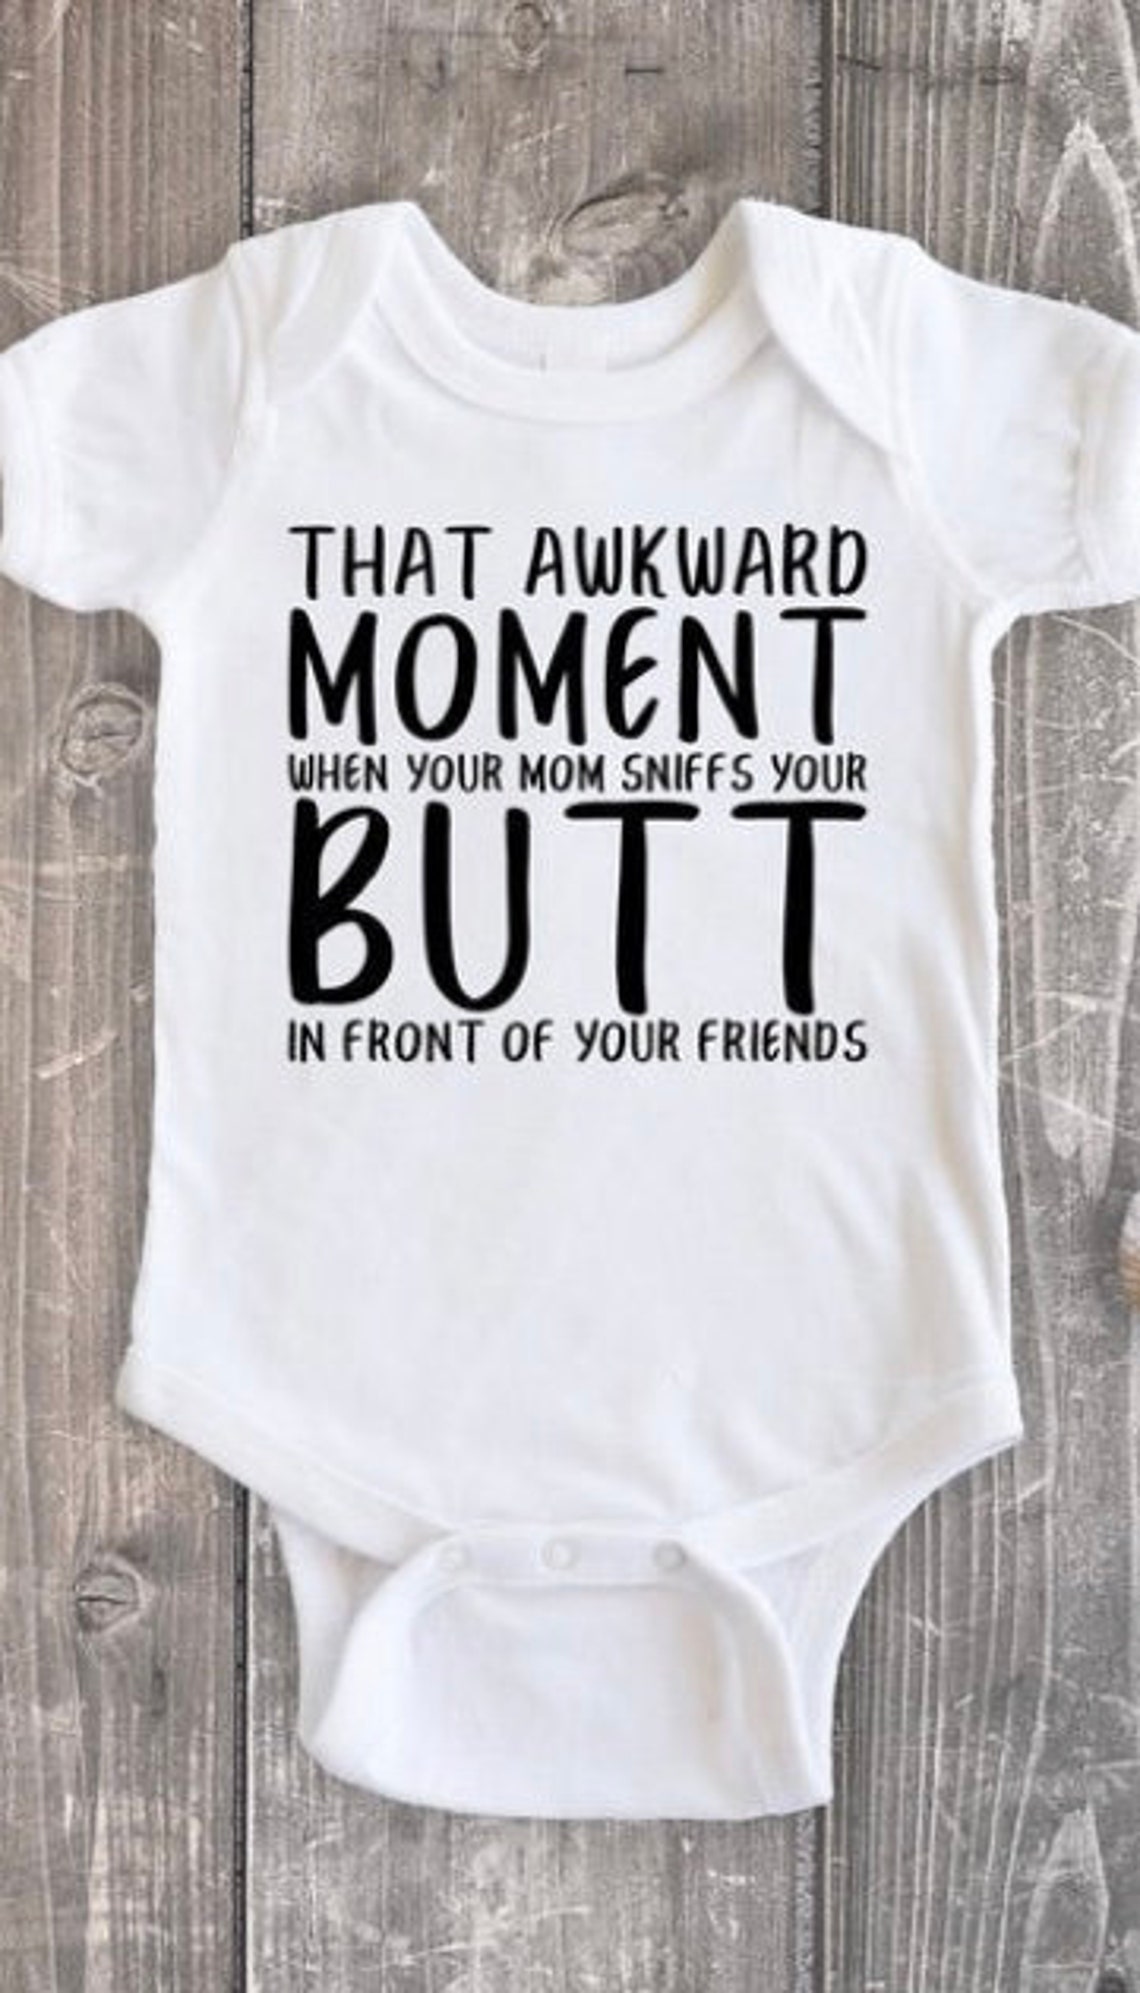 That awkward moment when your mom sniffs your butt in front of | Etsy